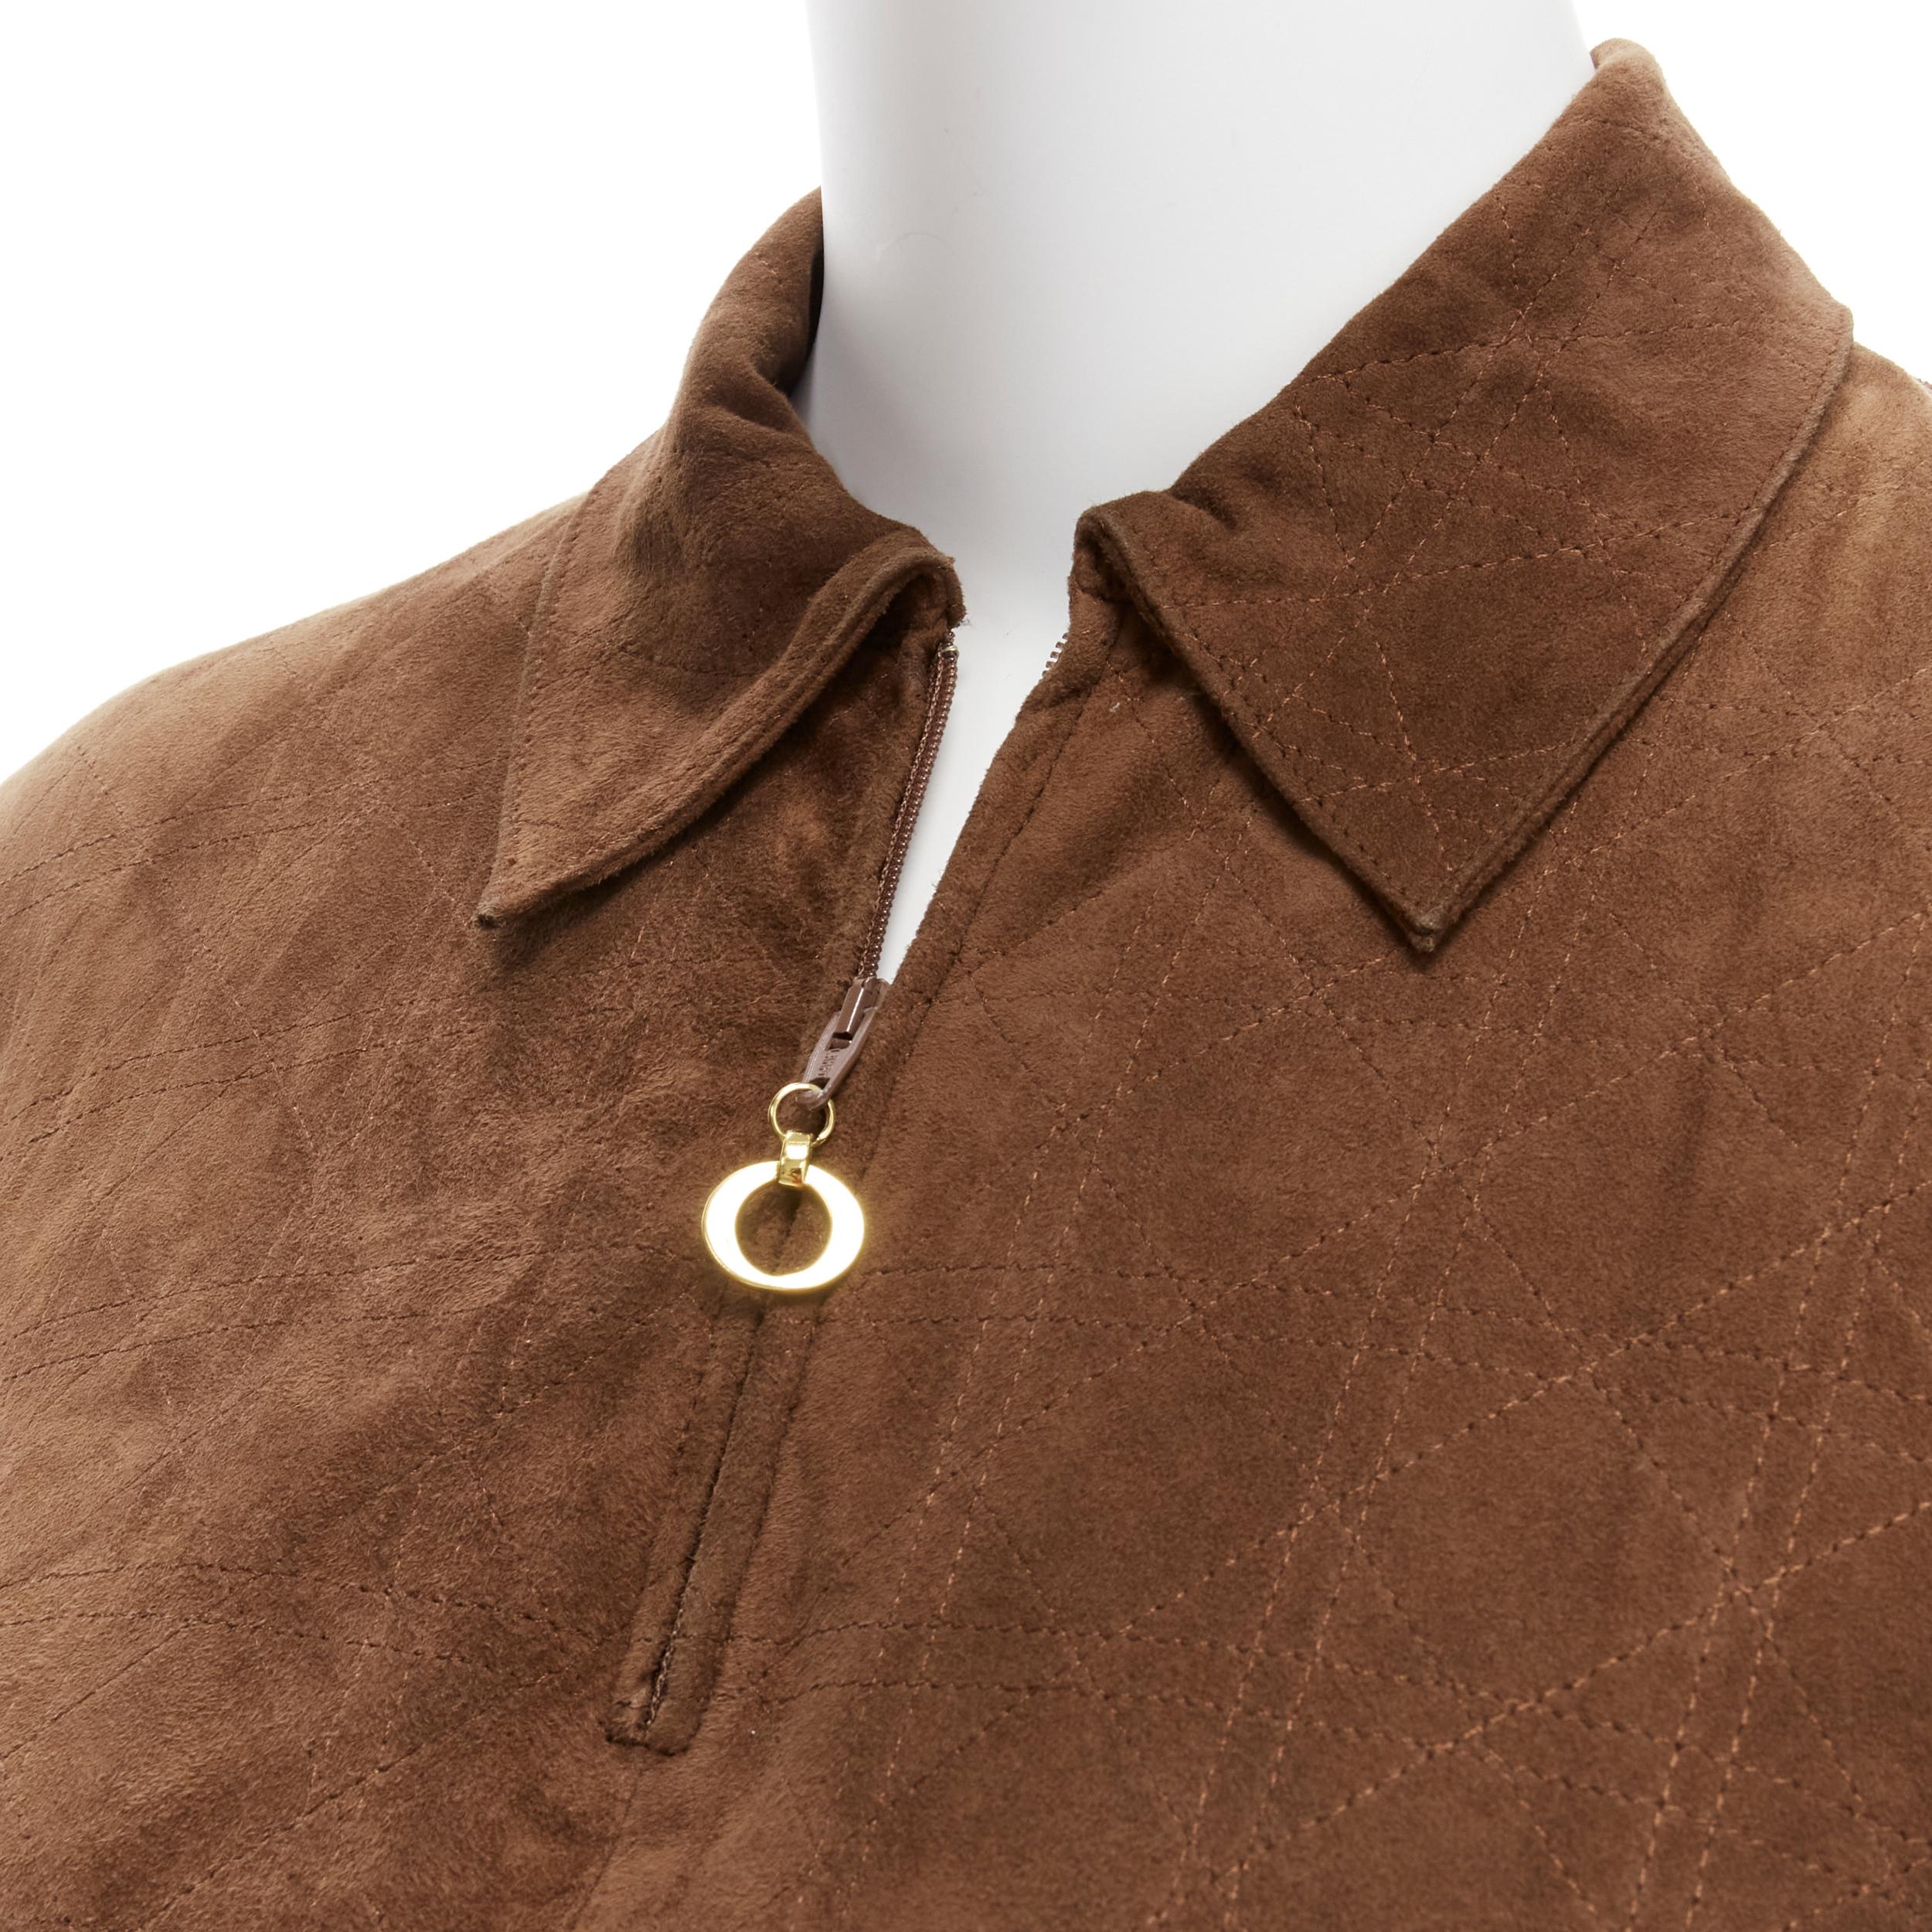 CHRISTIAN DIOR Vintage Cannage stitch brown suede leather ribbed half zip sweater
Reference: TGAS/D00242
Brand: Christian Dior
Material: Suede, Boucle Wool
Color: Brown
Pattern: Solid
Closure: Zip
Lining: Brown Fabric
Extra Details: Signature Dior